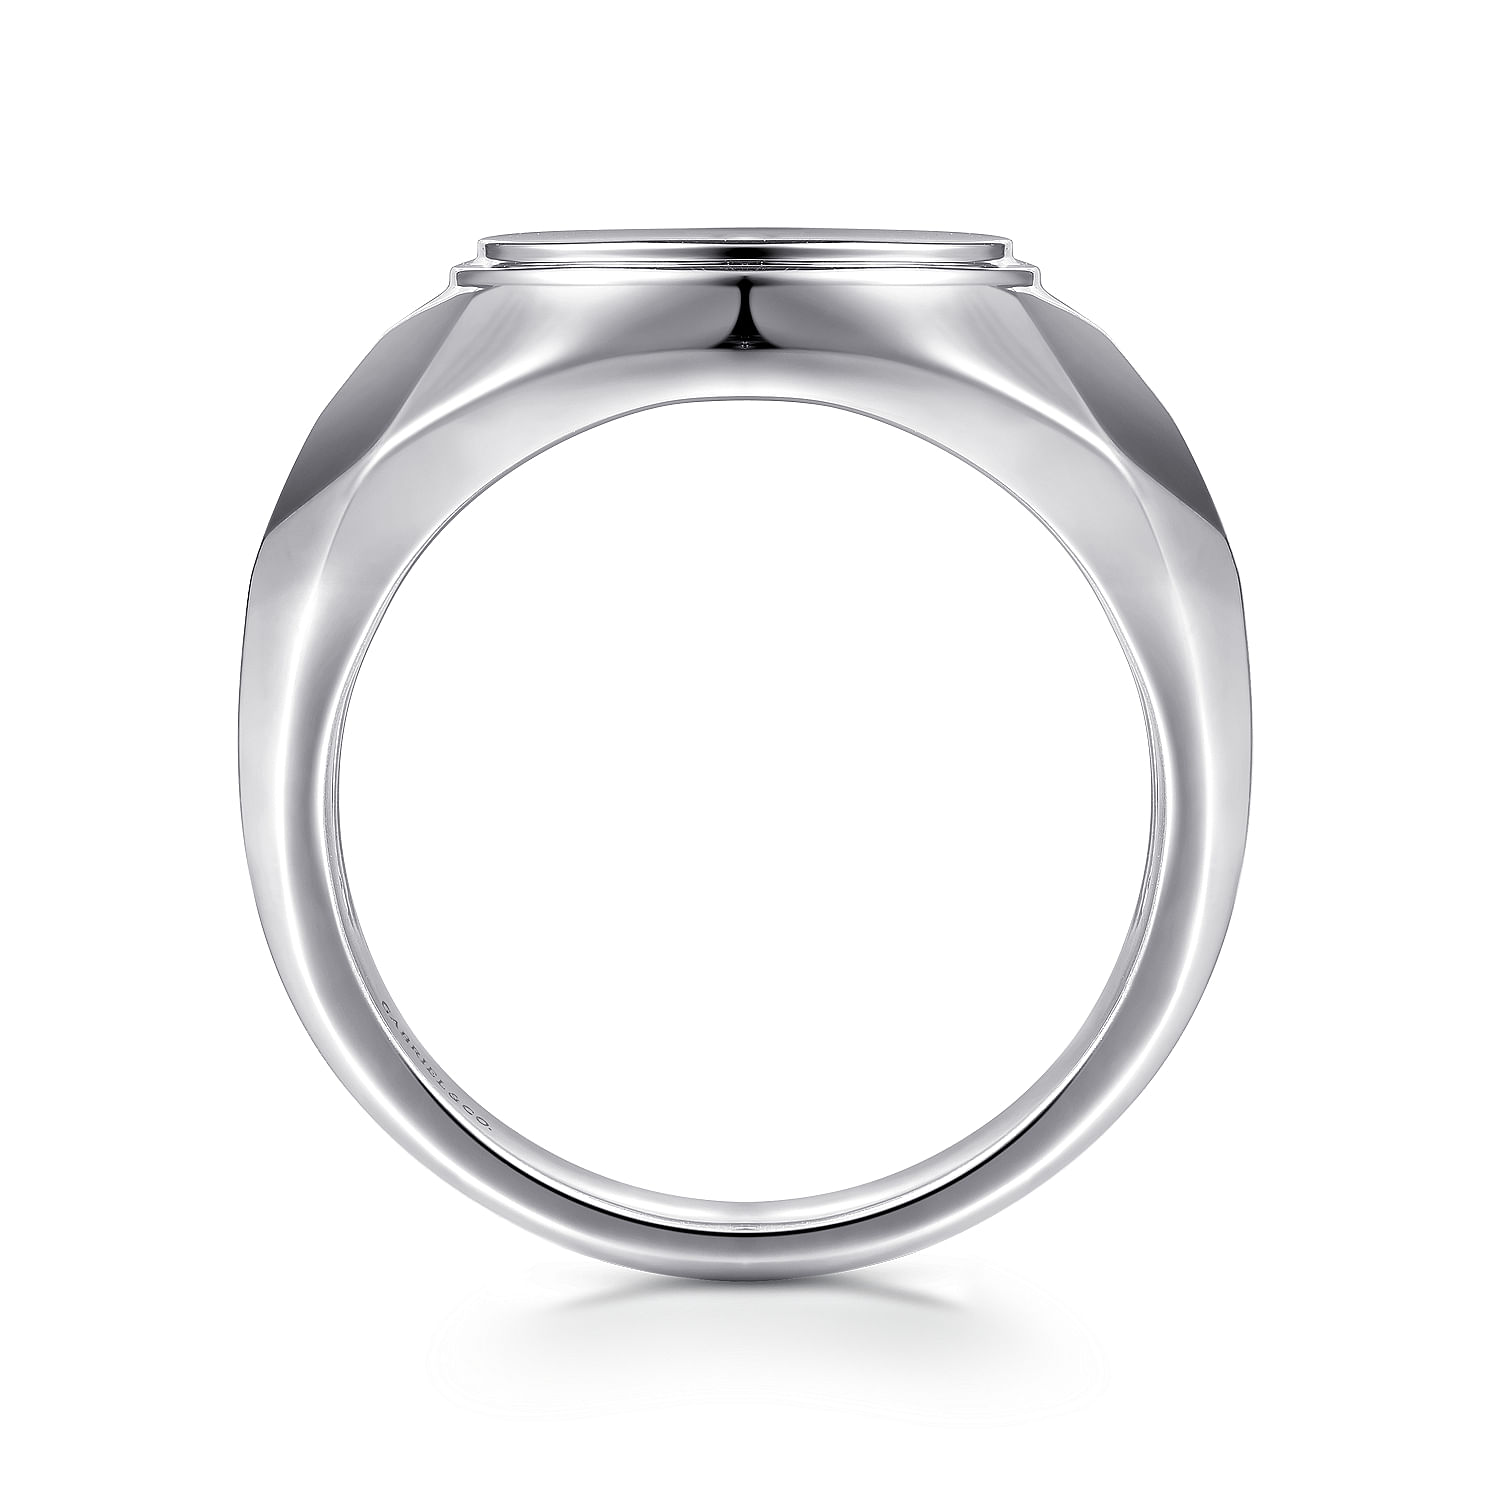 Wide 925 Sterling Silver Round Signet Ring in High Polished Finish